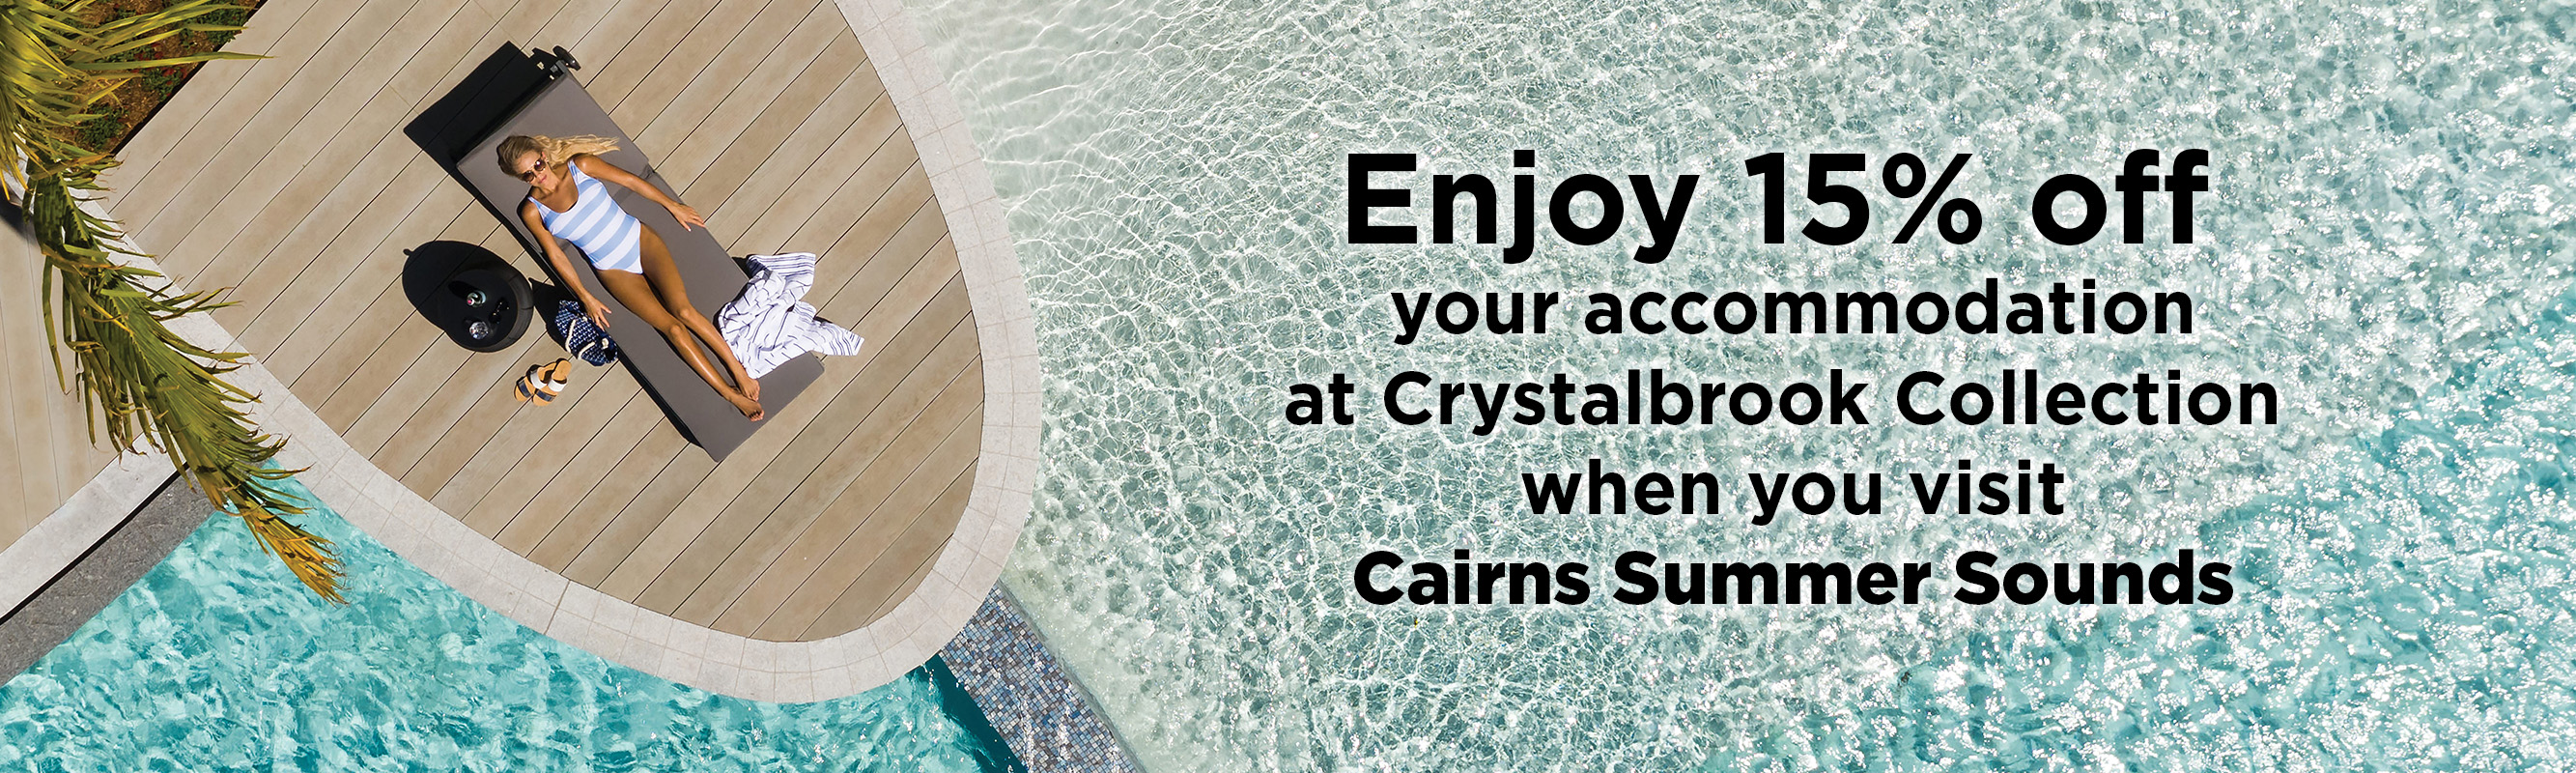 Enjoy 15% off your accommodation at Crystalbrook Collection when you visit Cairns Summer Sounds